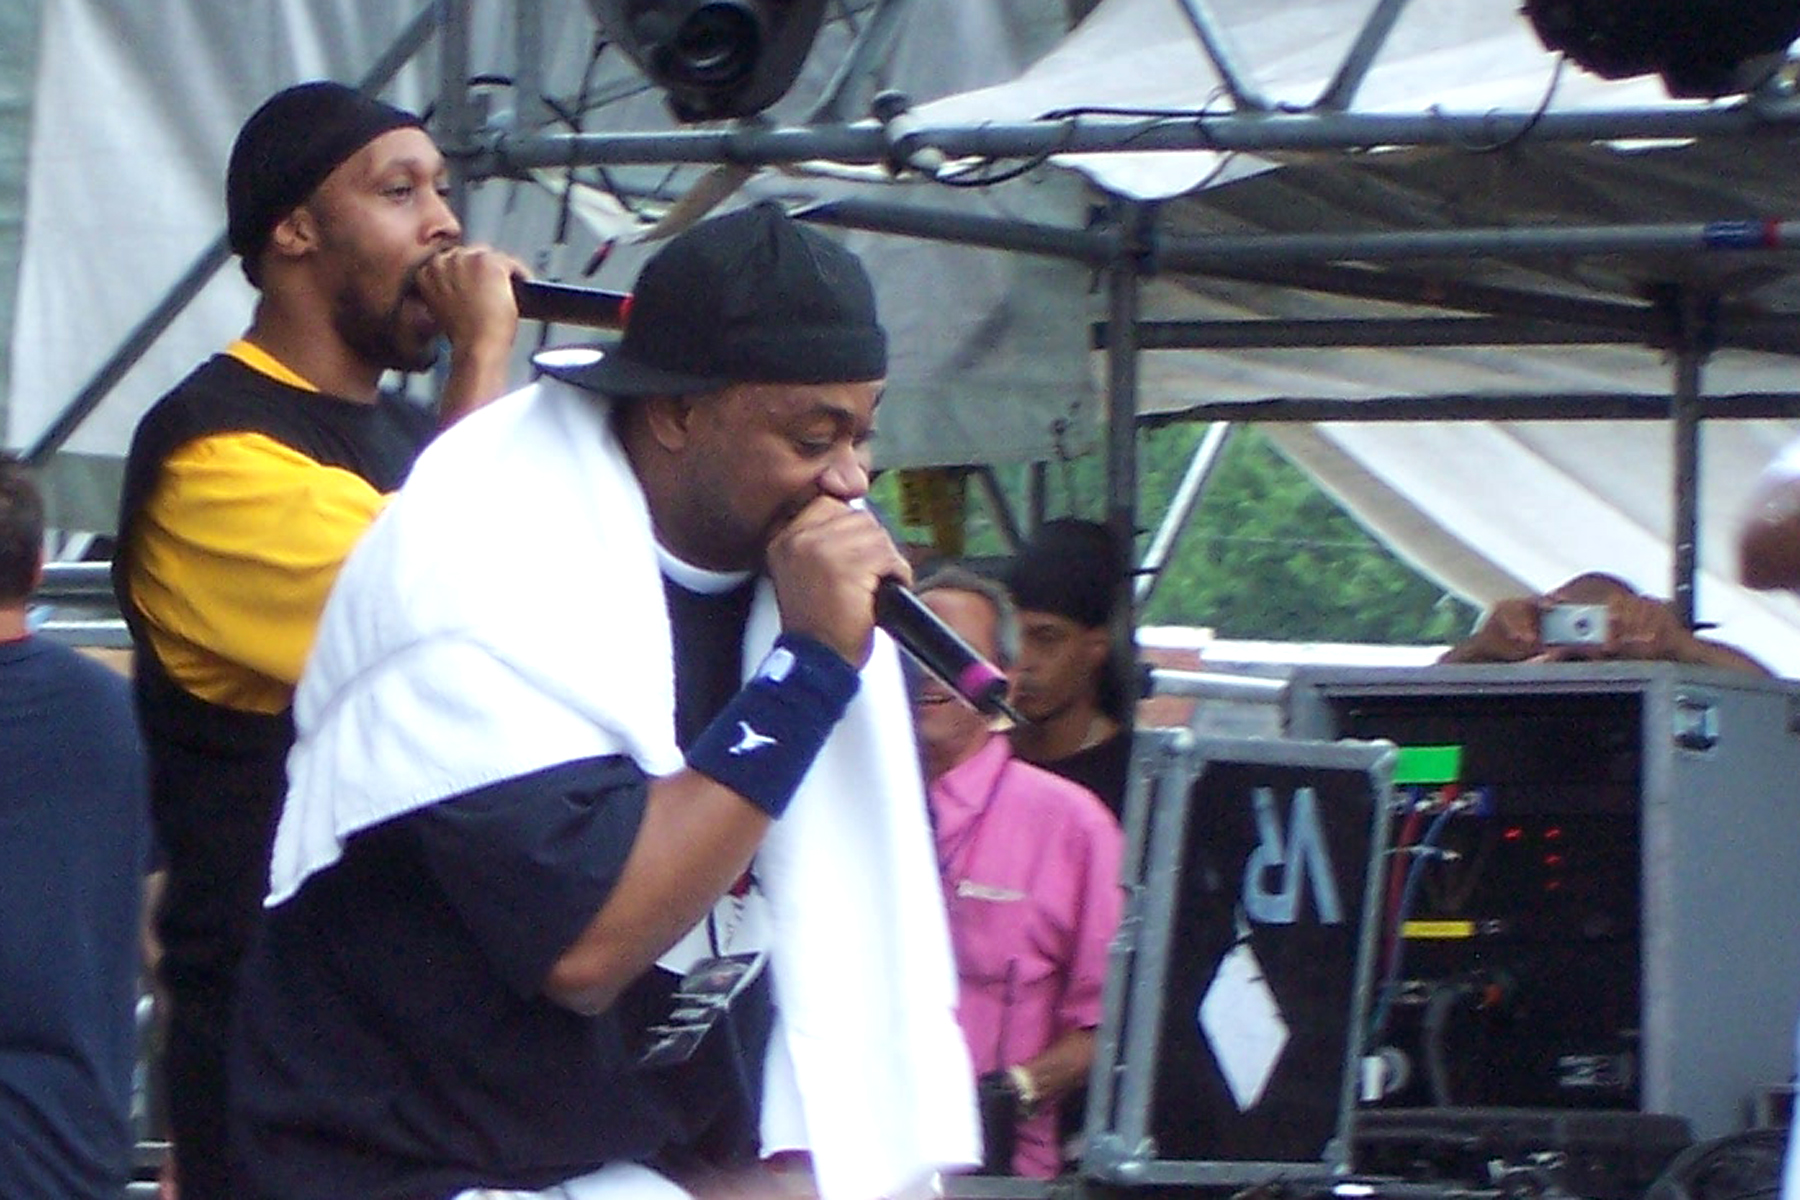 RZA has given Ghostface Killah the reigns for next Wu-Tang album